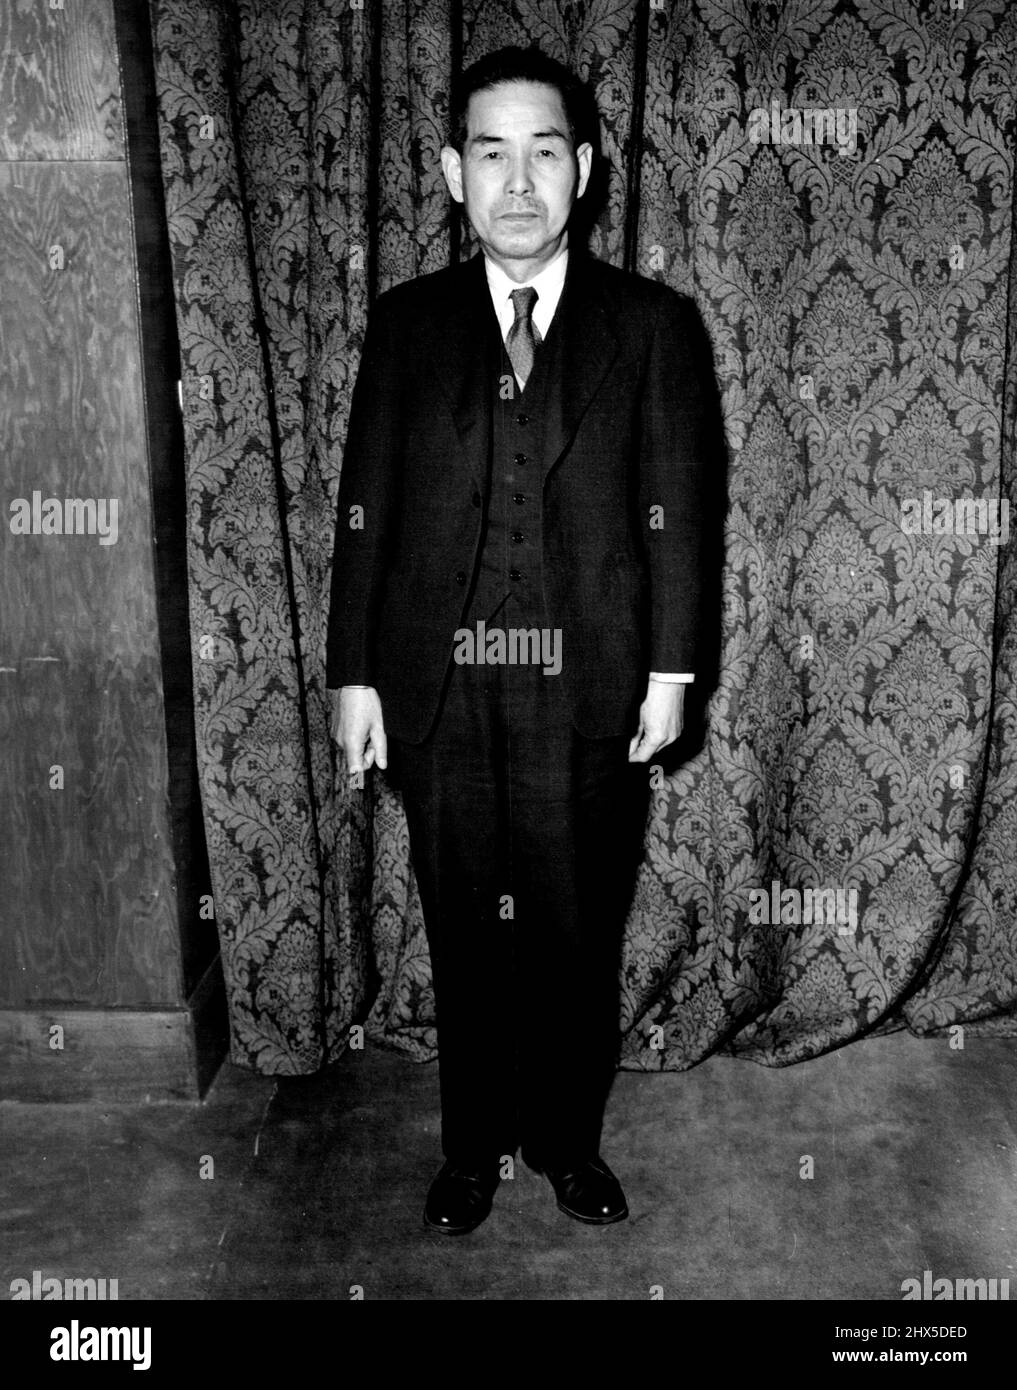 Alleged Japanese war Criminal on trial at IMTFE : Shunroku Hata, one of the 26 alleged Japanese War Criminals now on trial at the International Military Tribunal for the Far East, in the War ministry Blog., Tokyo, Japan. January 21, 1947. (Photo by Malone, Signal Corps U.S. Army). Stock Photo